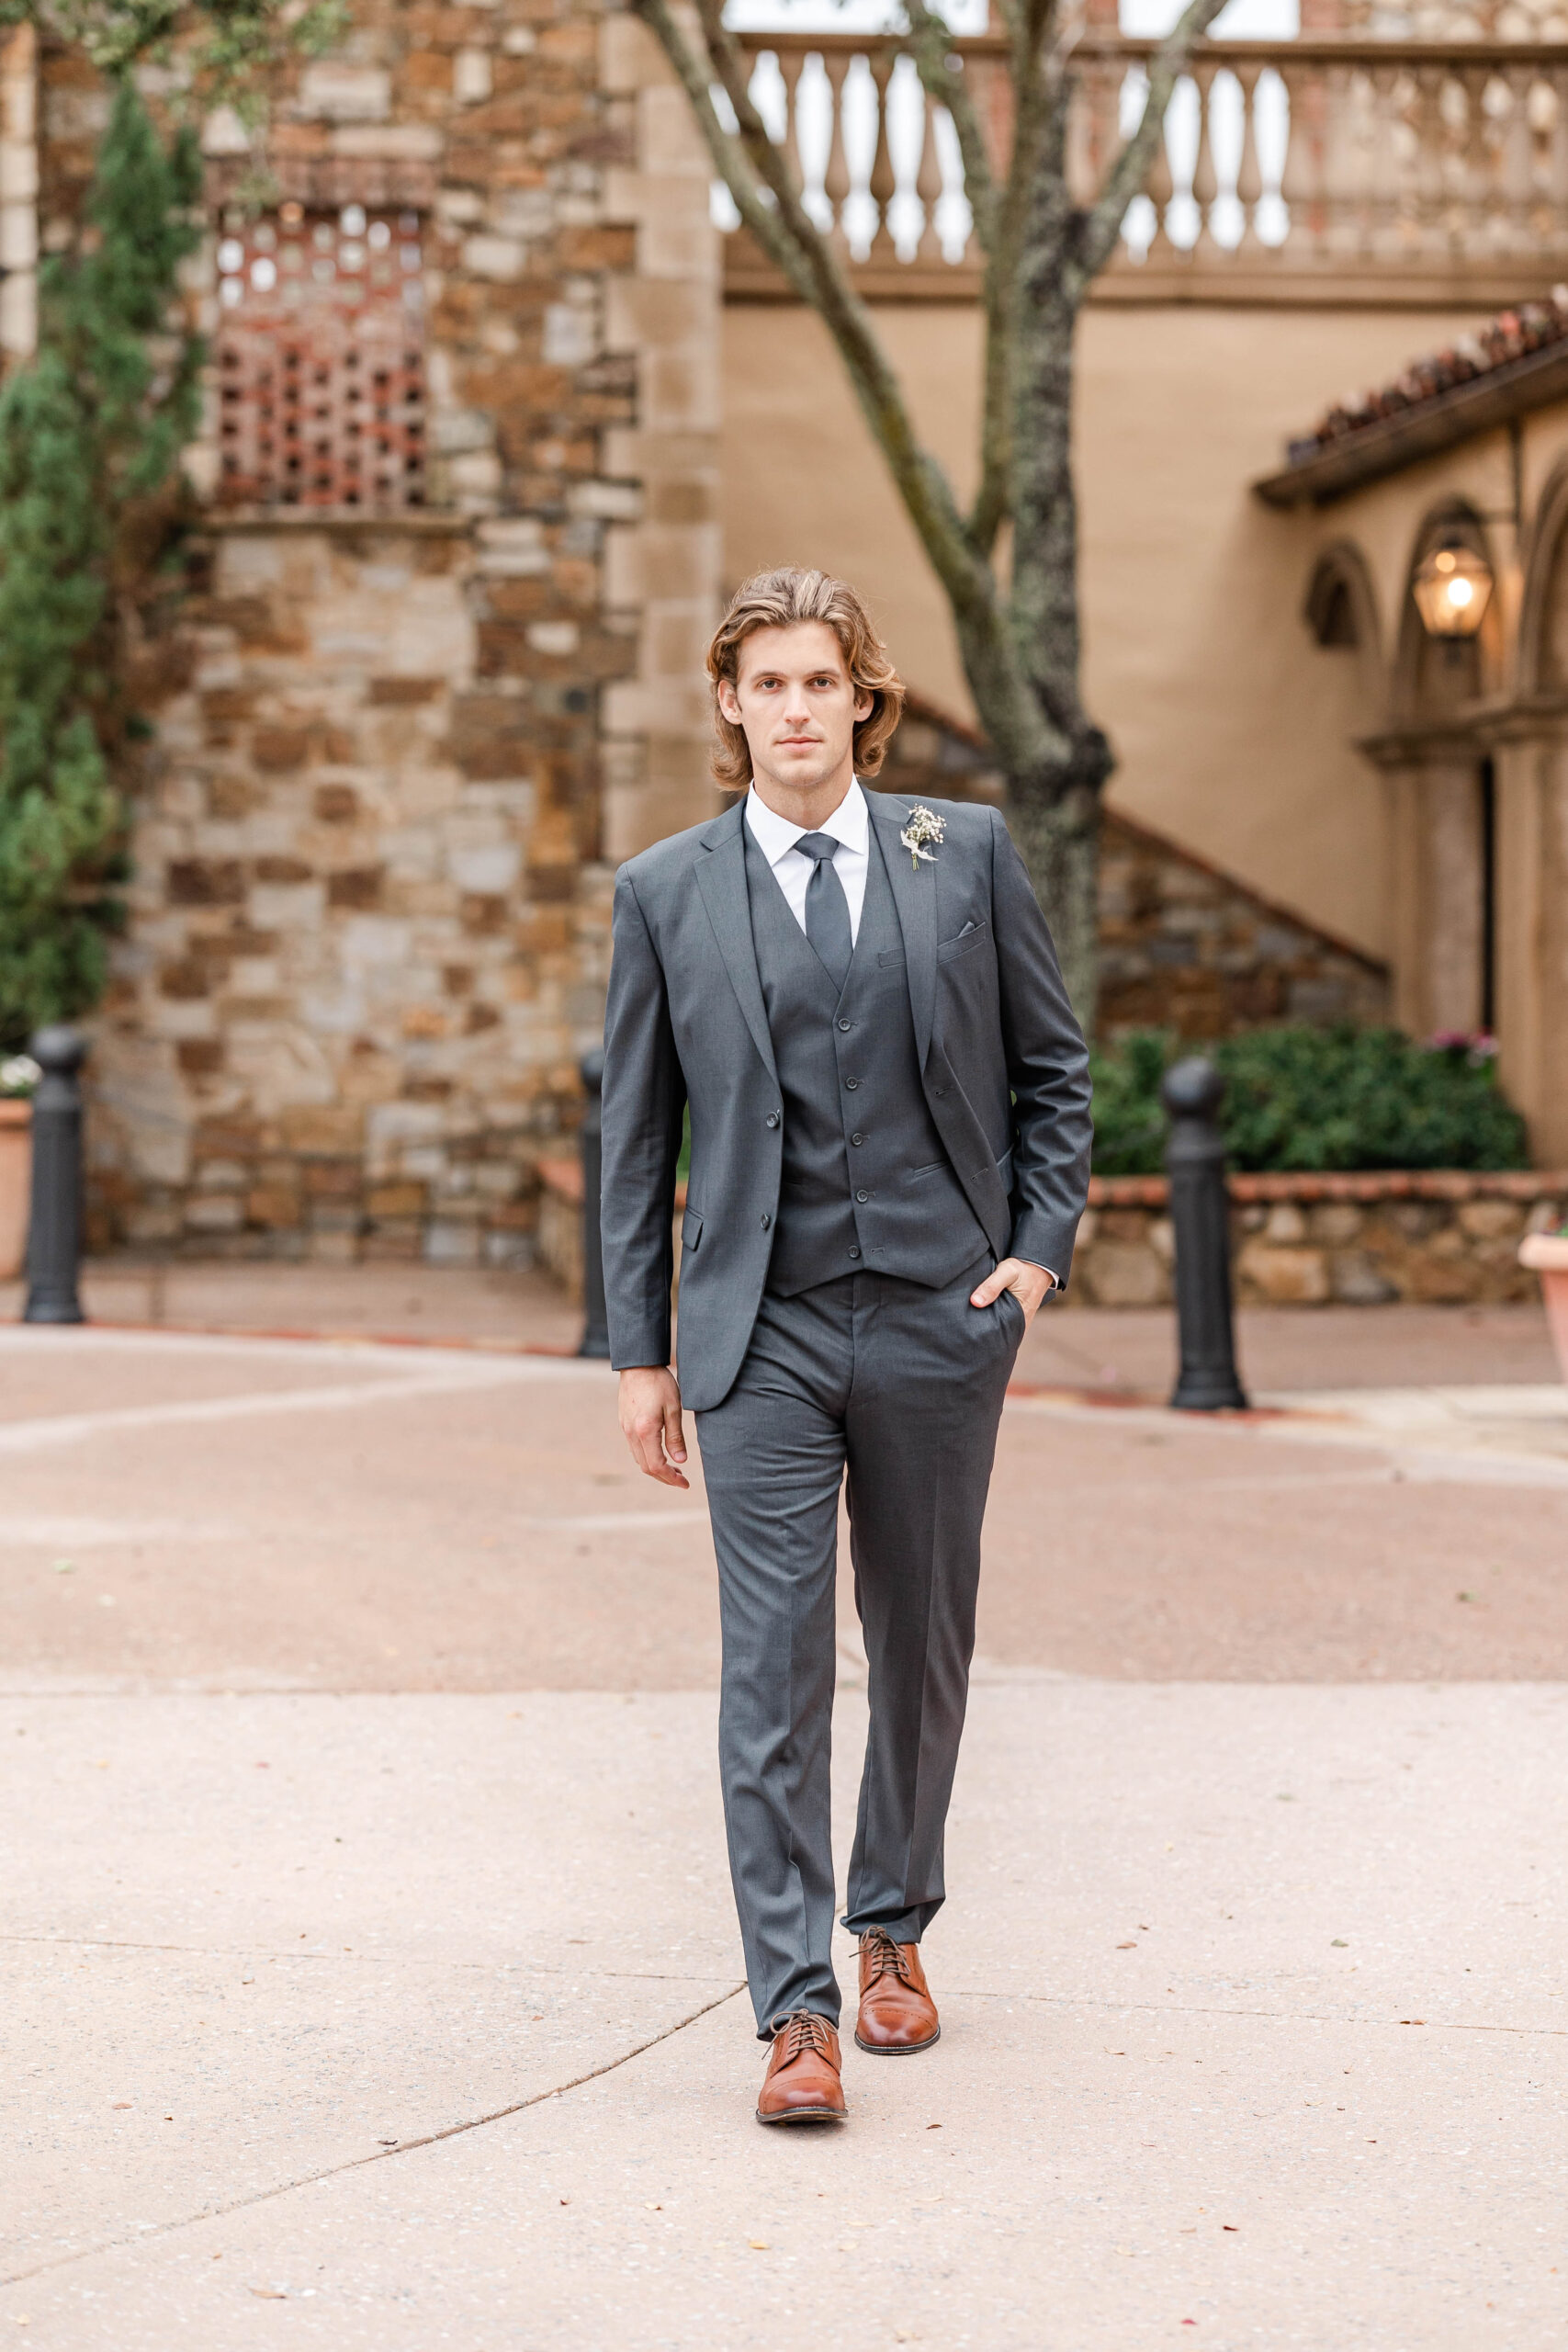 Groom walking in the courtyard wearing a charcoal grey wedding suit